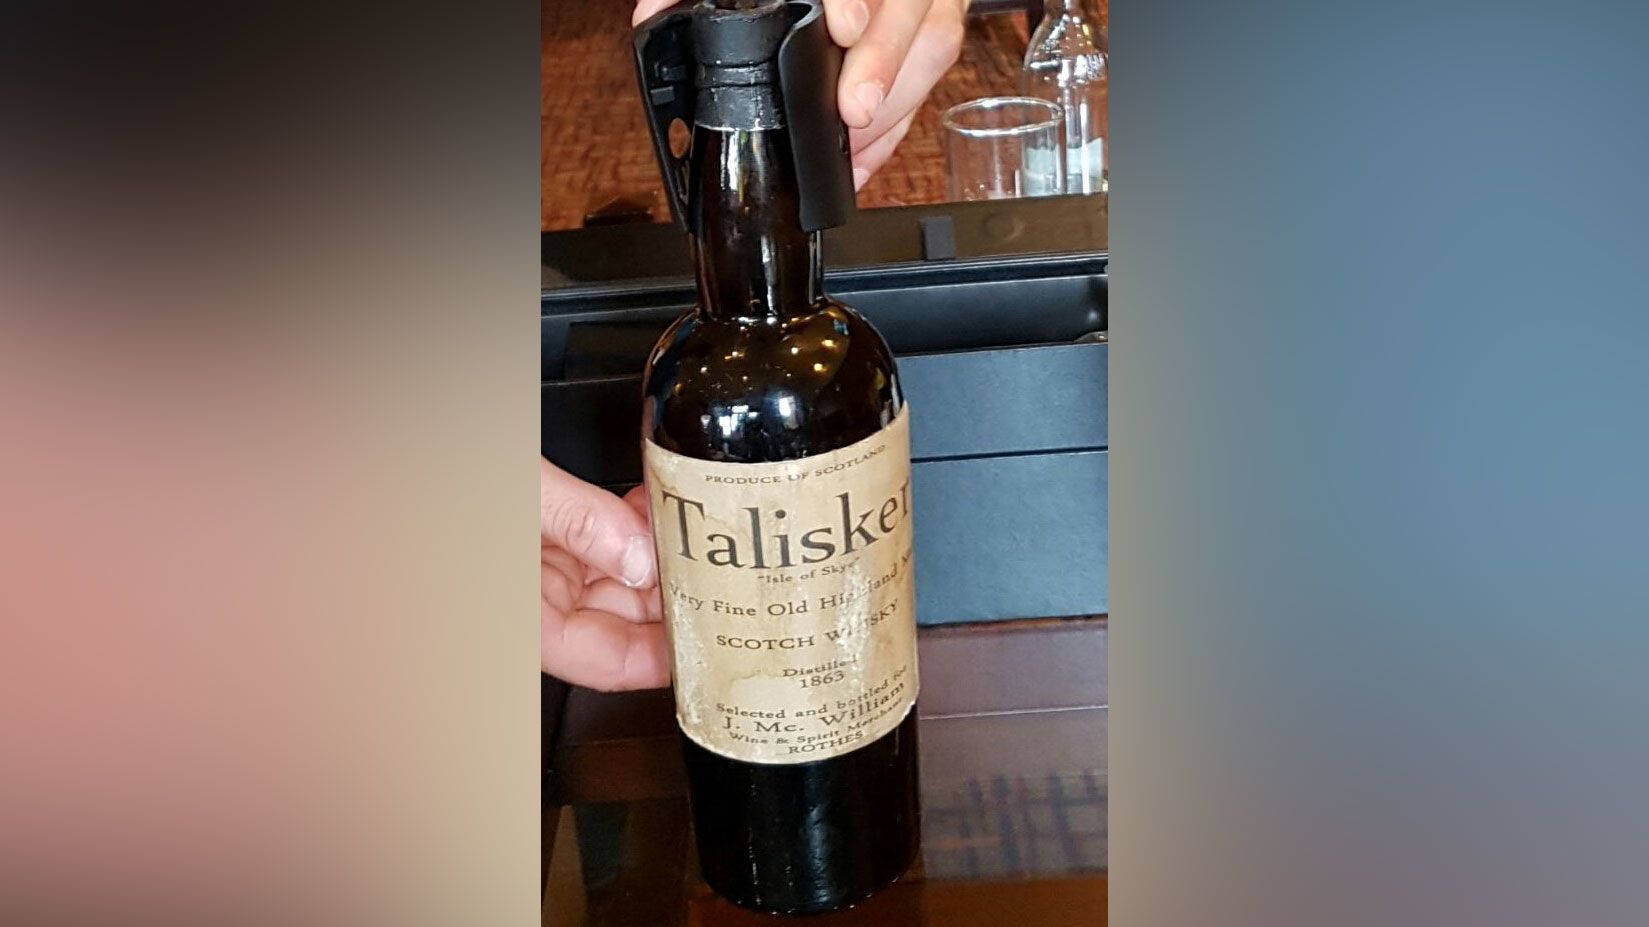 Scientists say the whisky in this bottle described as an 1863 Talisker was actually distilled in 2005 or later.